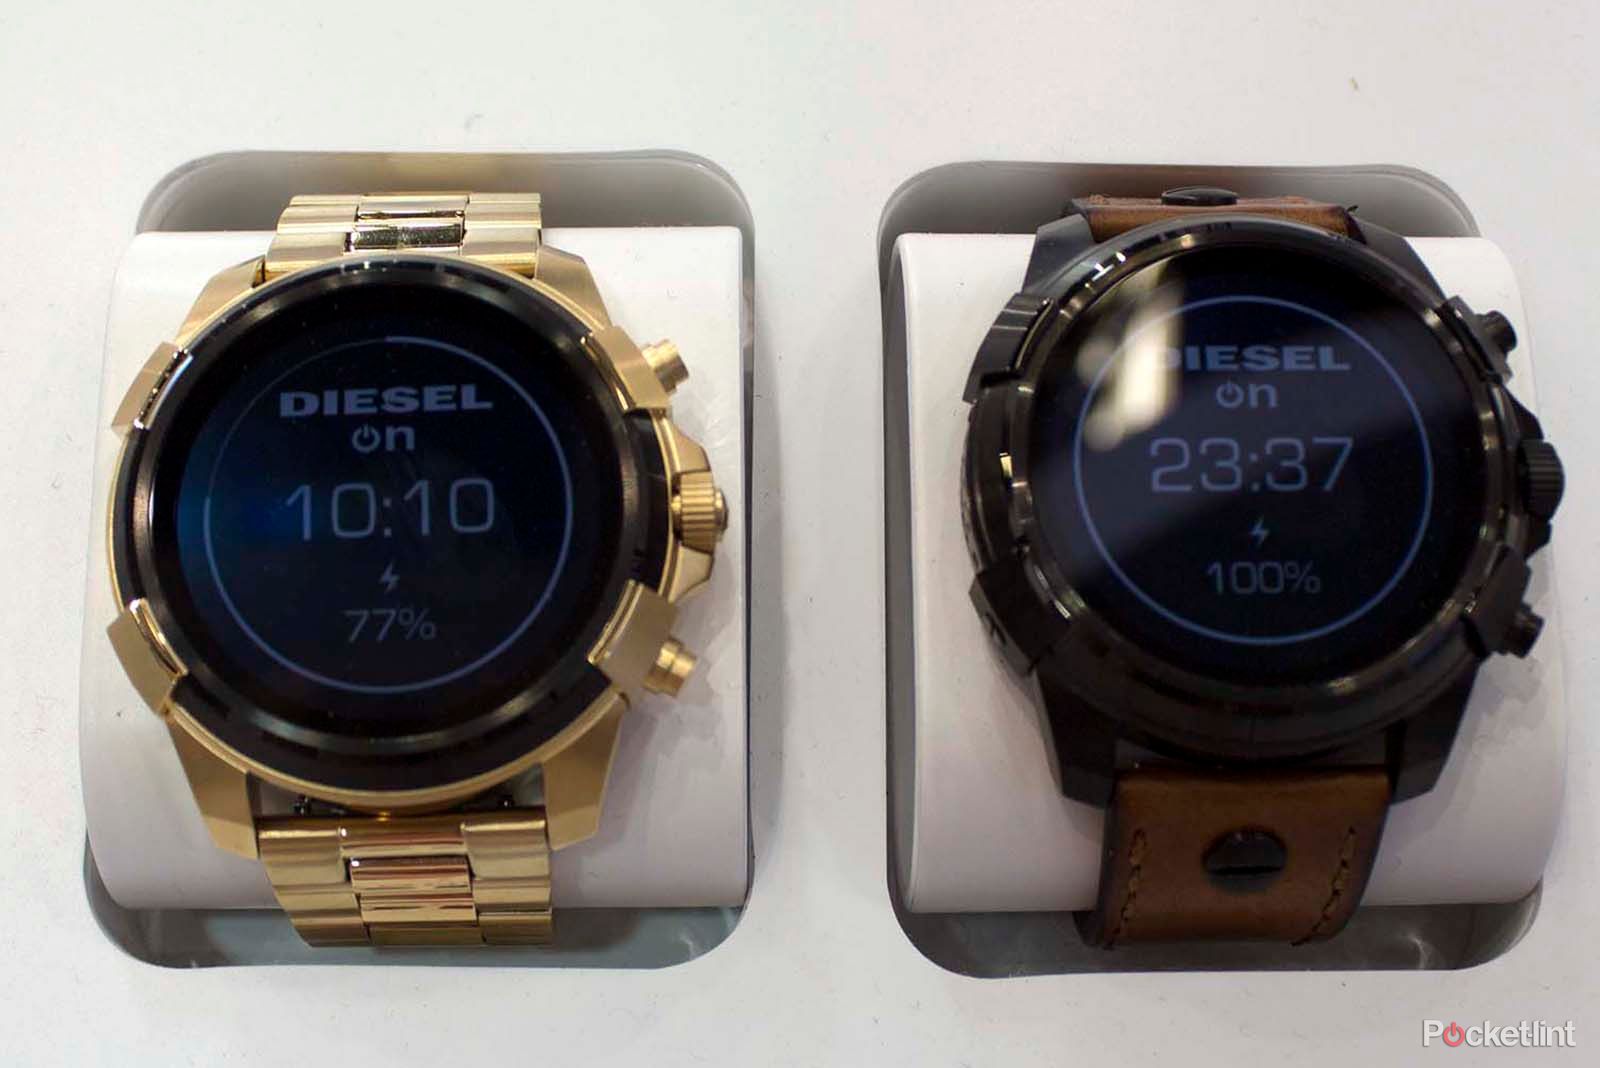 Fossil 2017 Smartwatches image 1